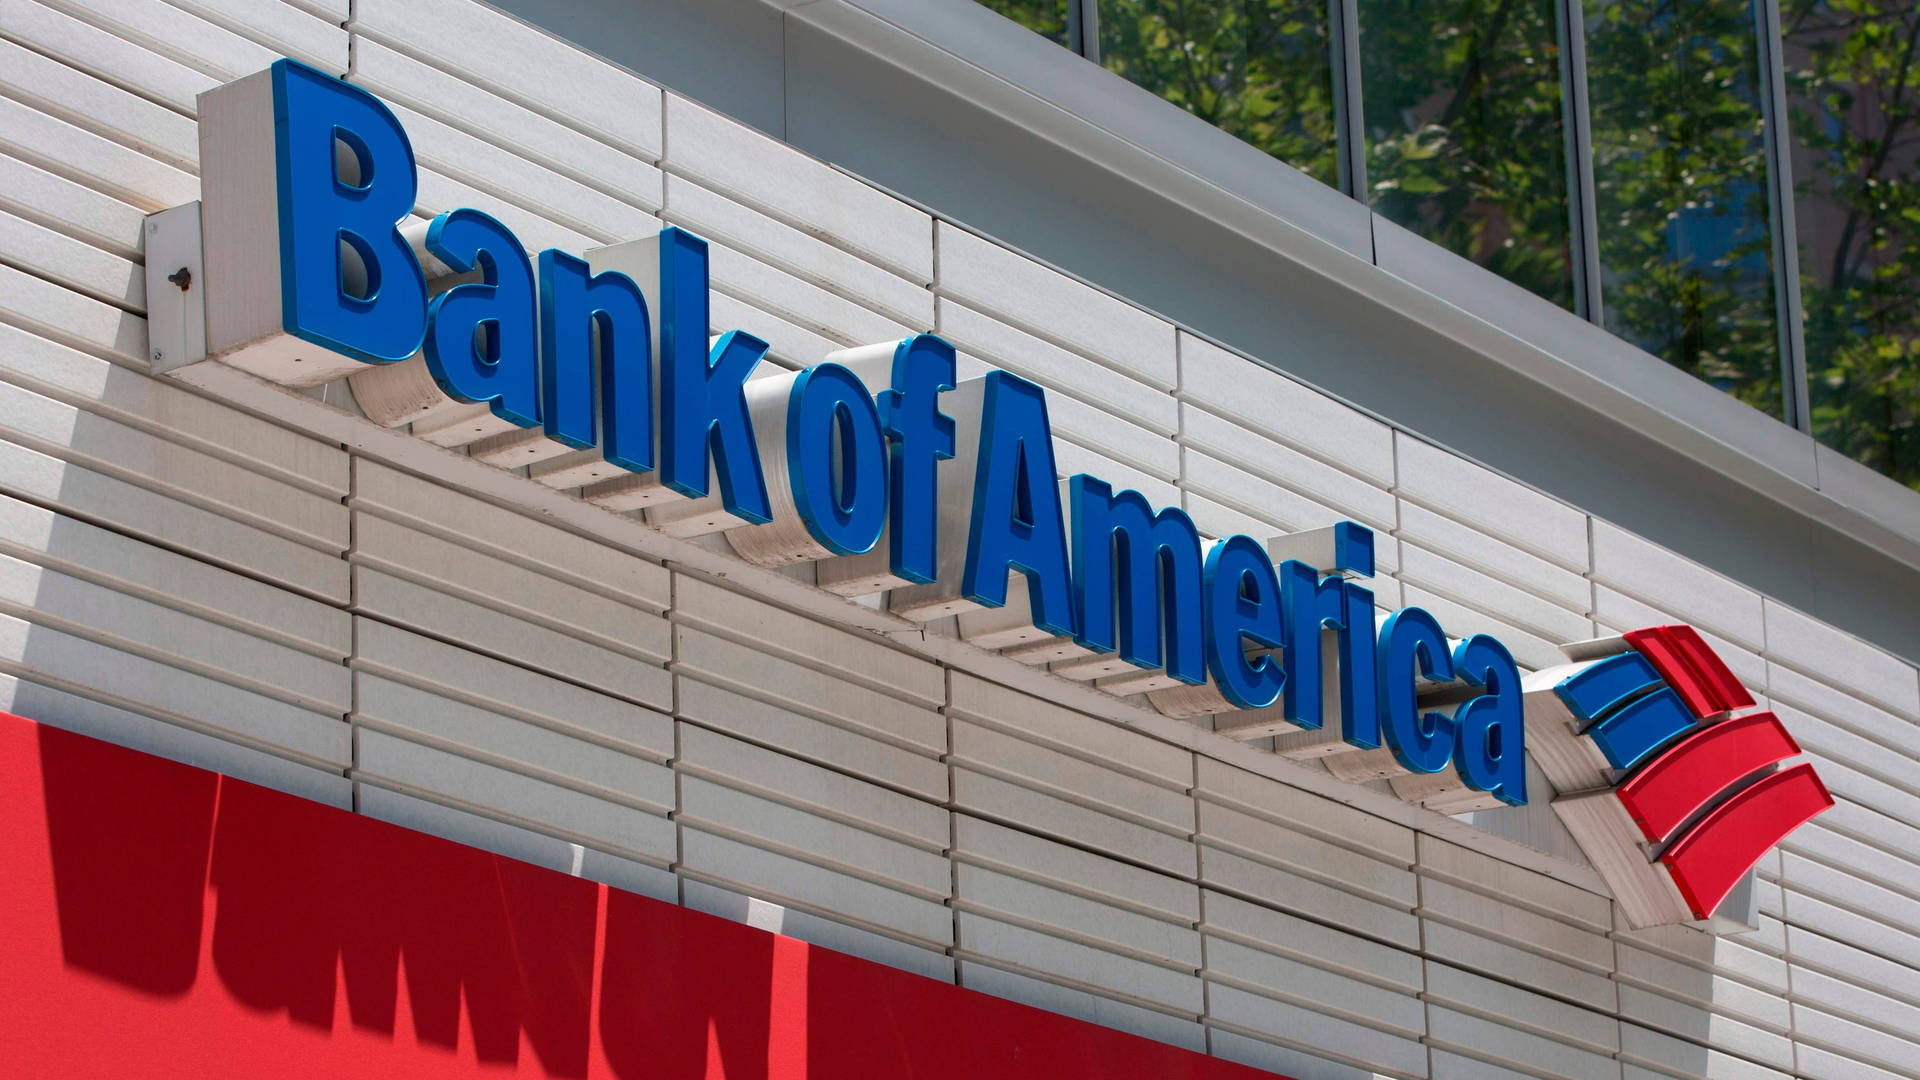 Bank Of America 3d Signage Picture